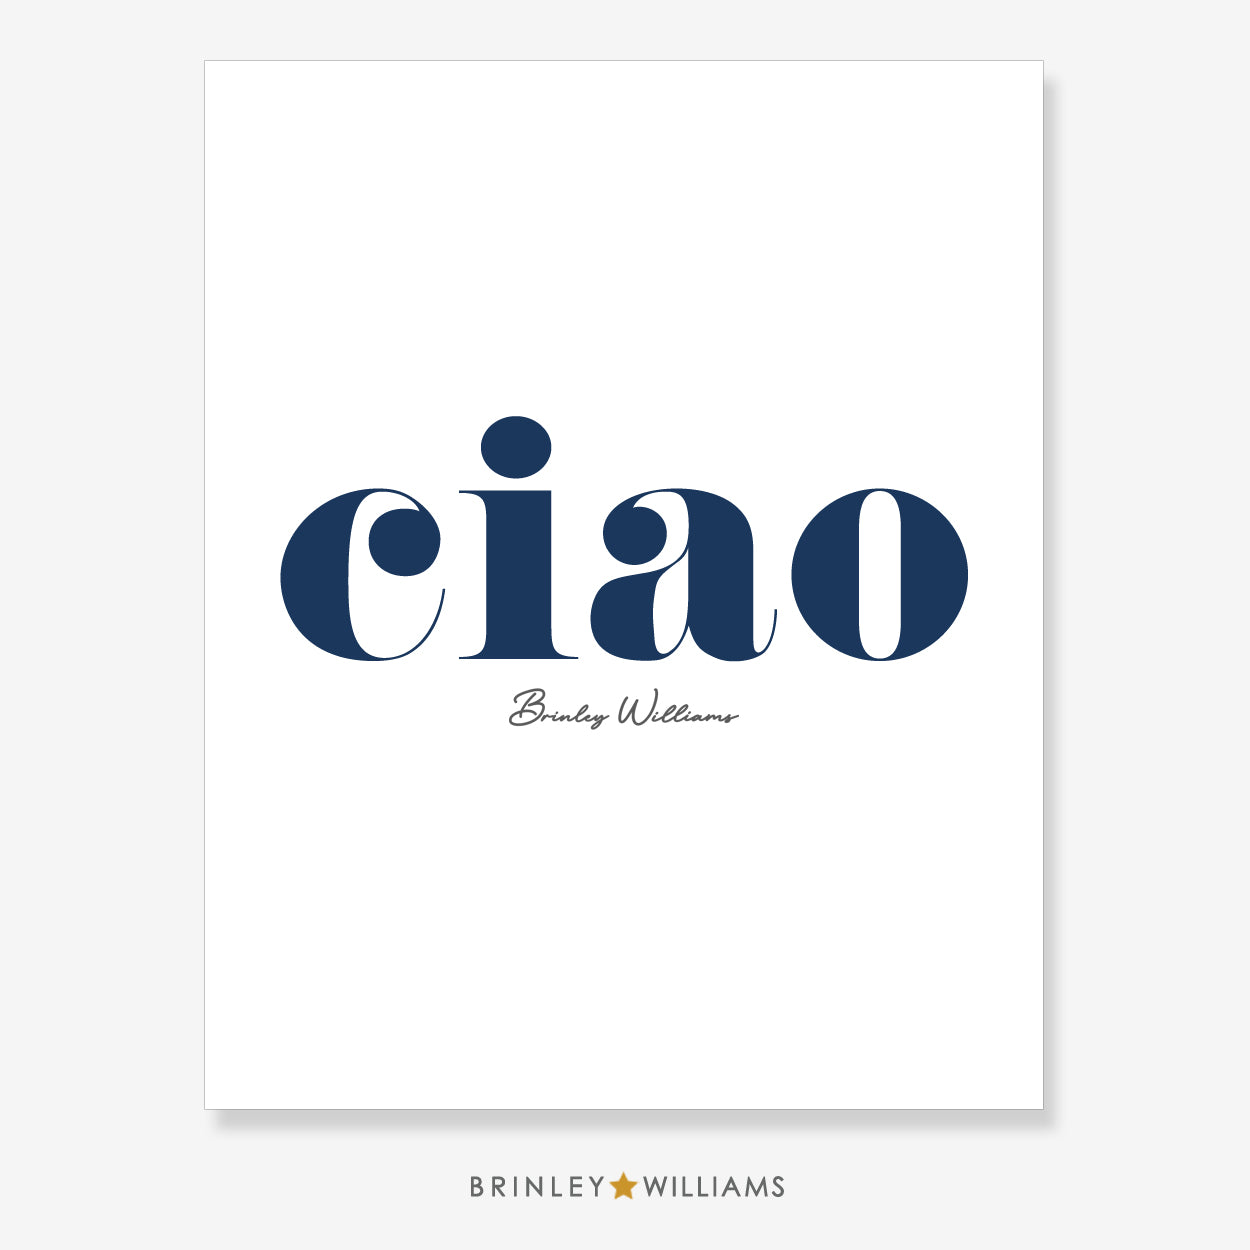 Ciao Wall Art Poster - Navy